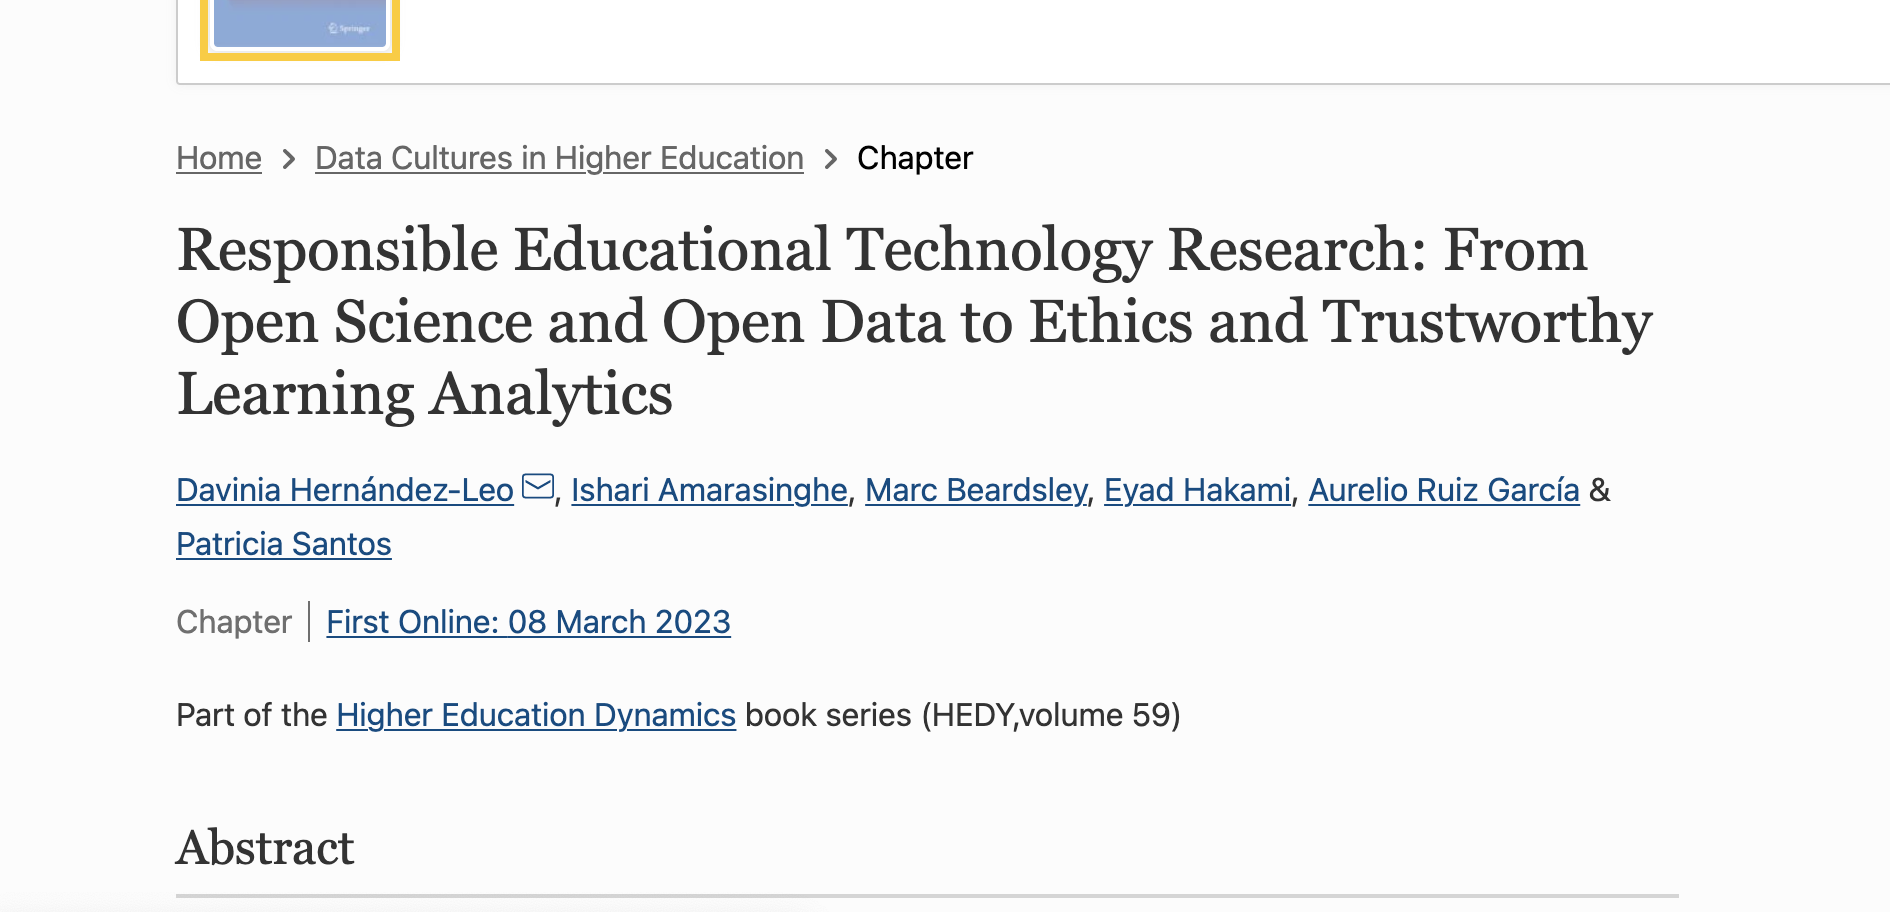 Responsible Educational Technology Research: From Open Science and Open Data to Ethics and Trustworthy Learning Analytics